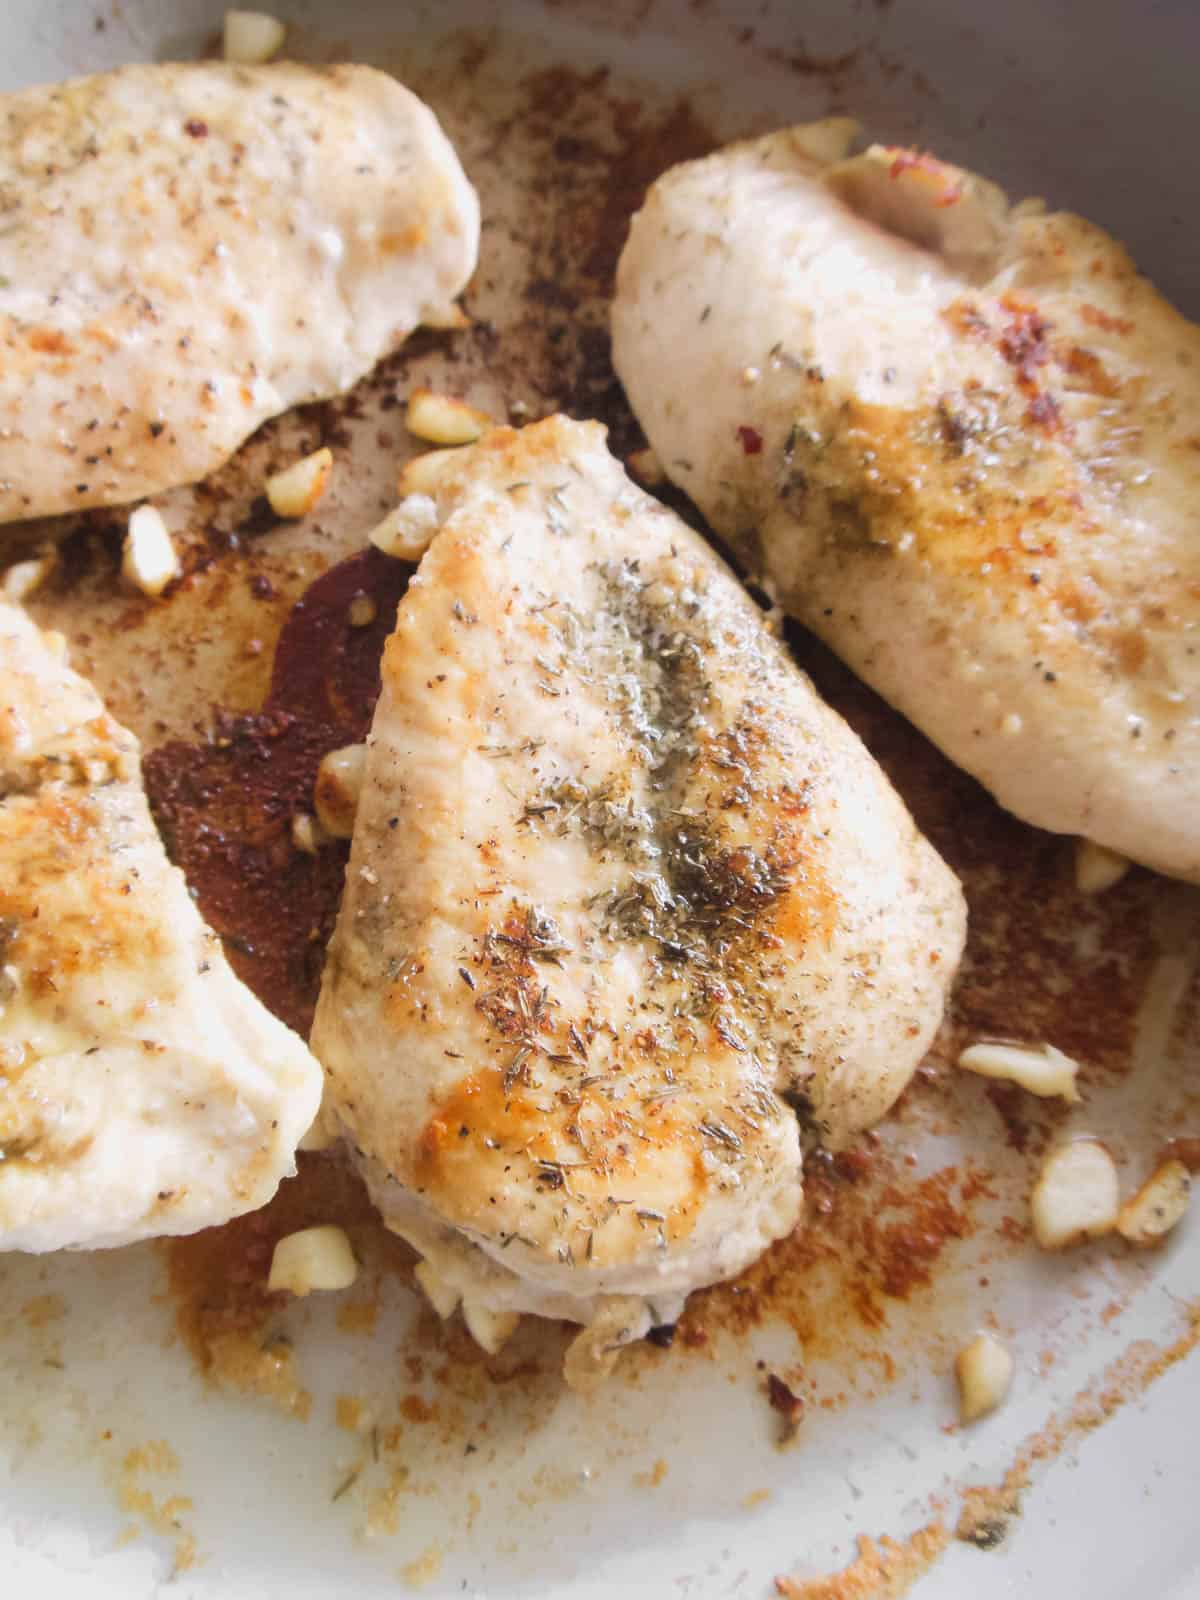 Grilled chicken with onion and garlic.